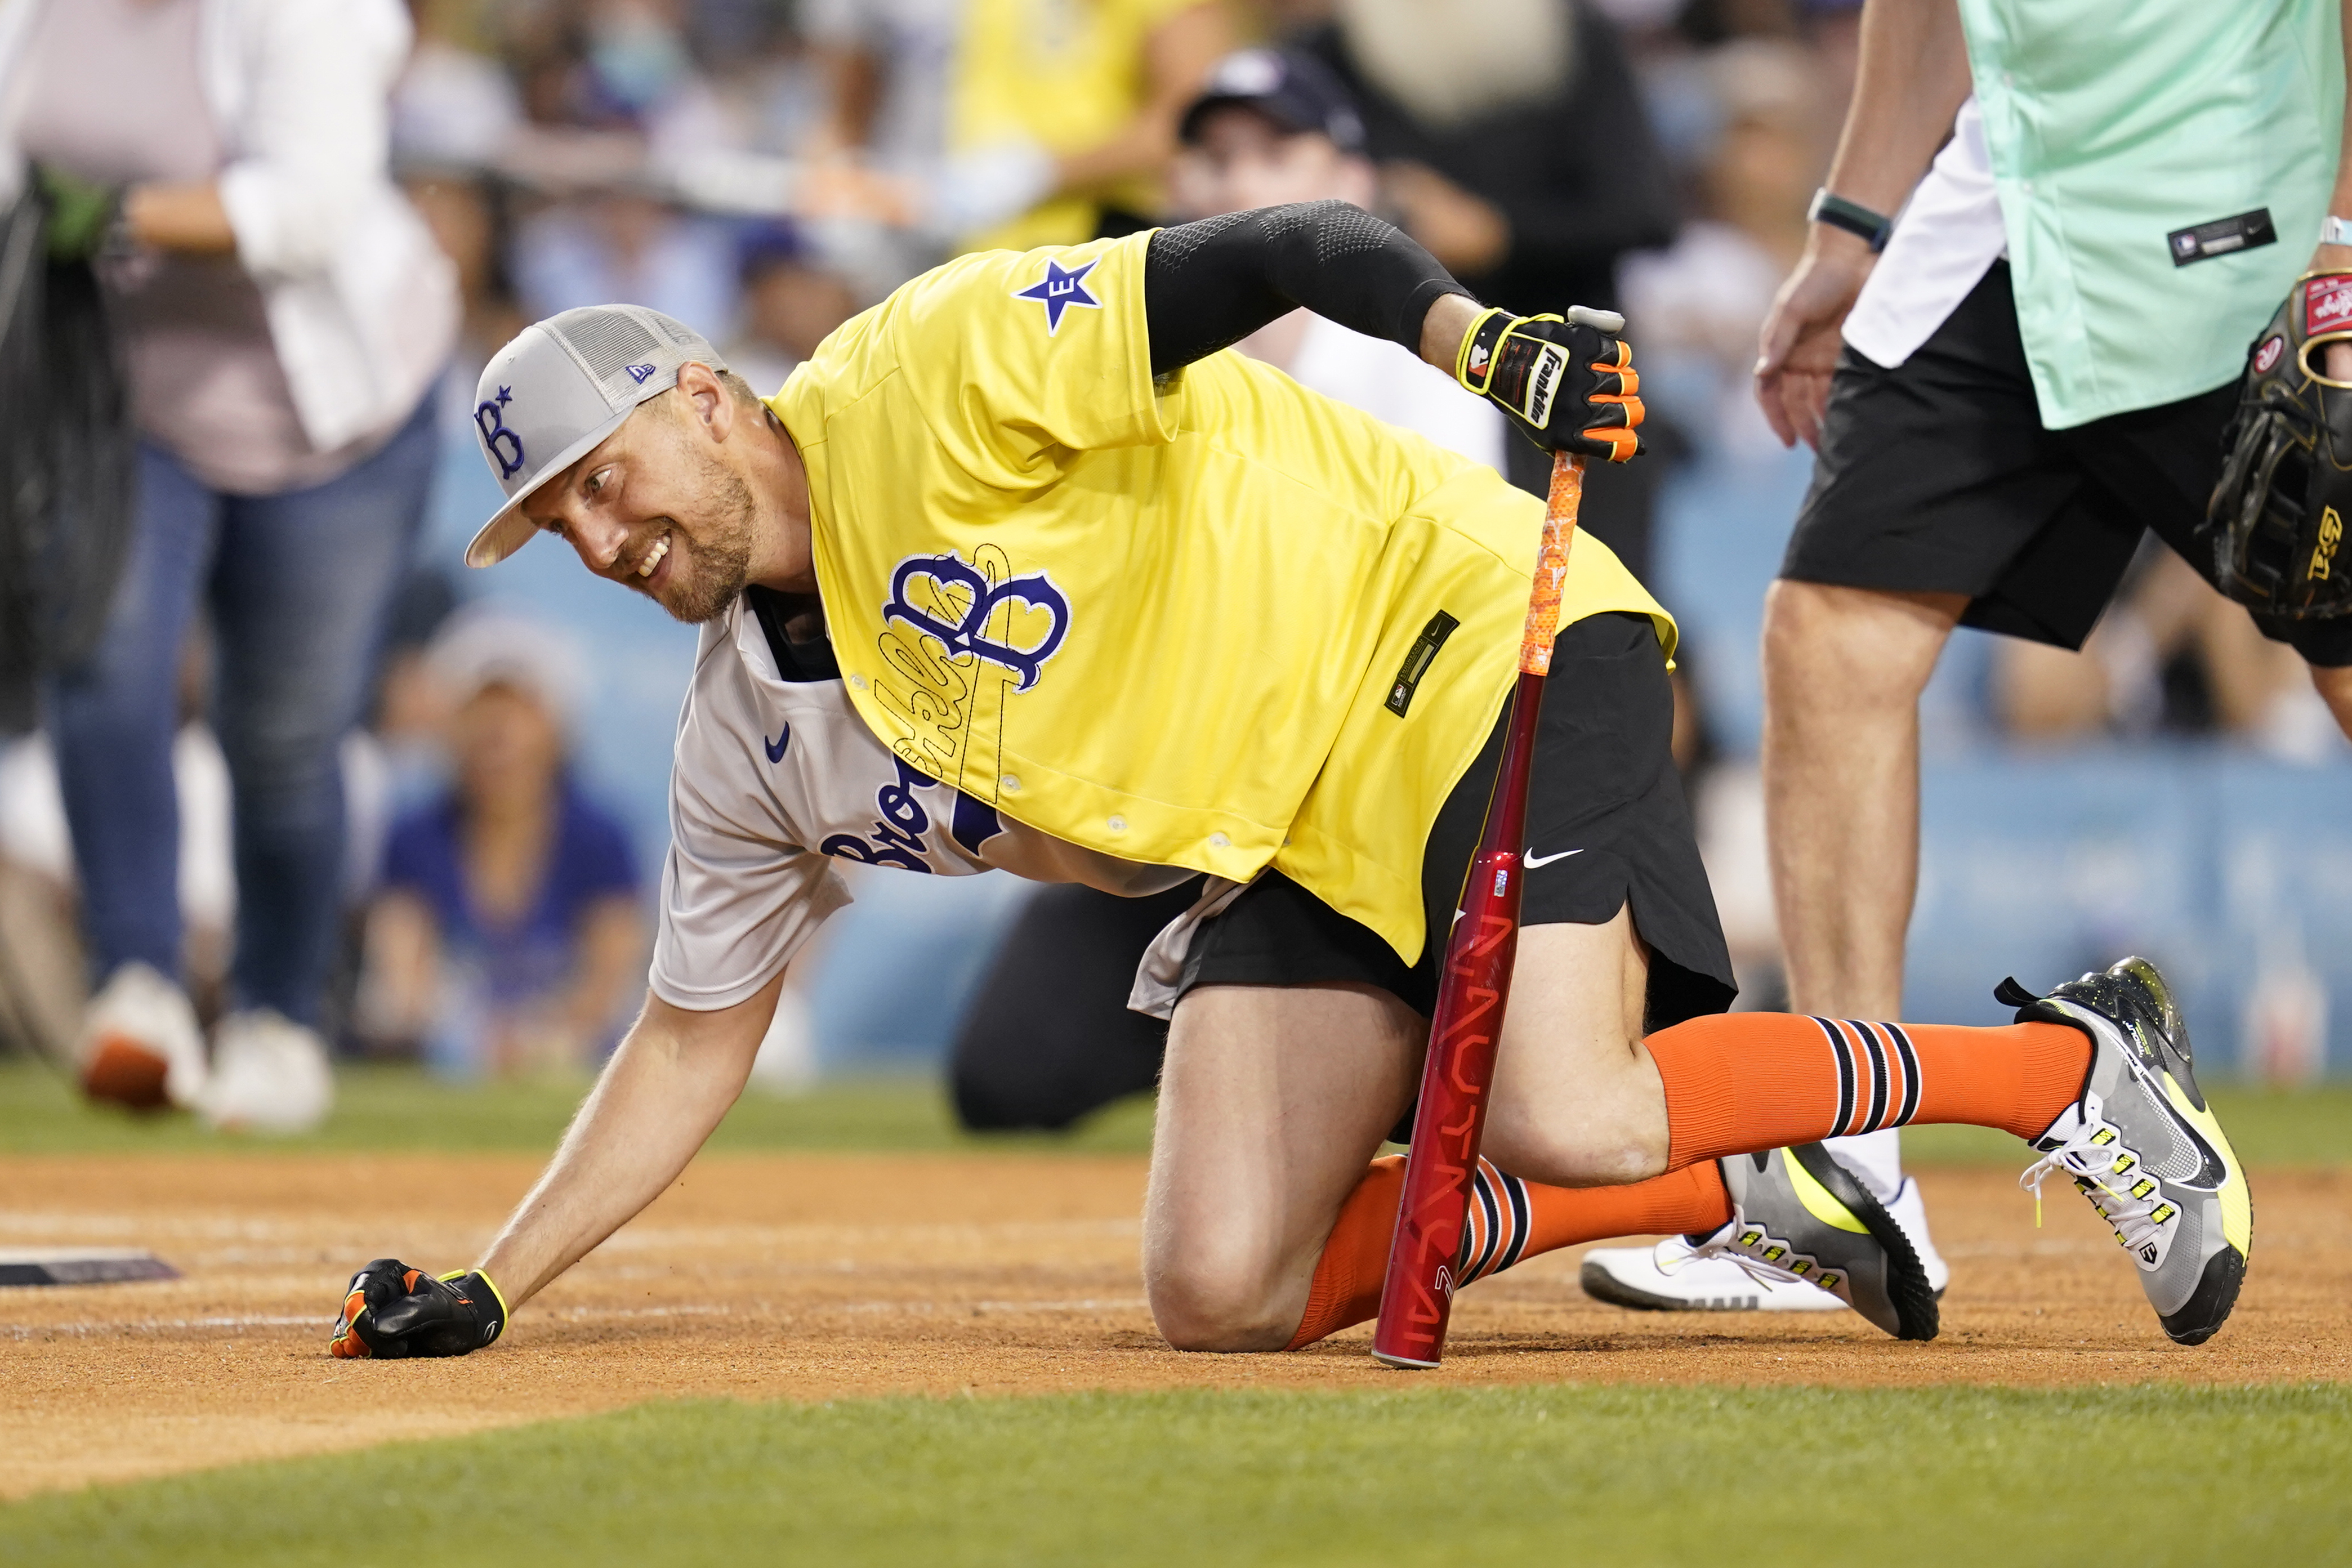 Rapper and singer Bad Bunny runs in the outfield during the MLB All Star  Celebrity Softball game, Saturday, July 16, 2022, in Los Angeles. (AP  Photo/Mark J. Terrill)